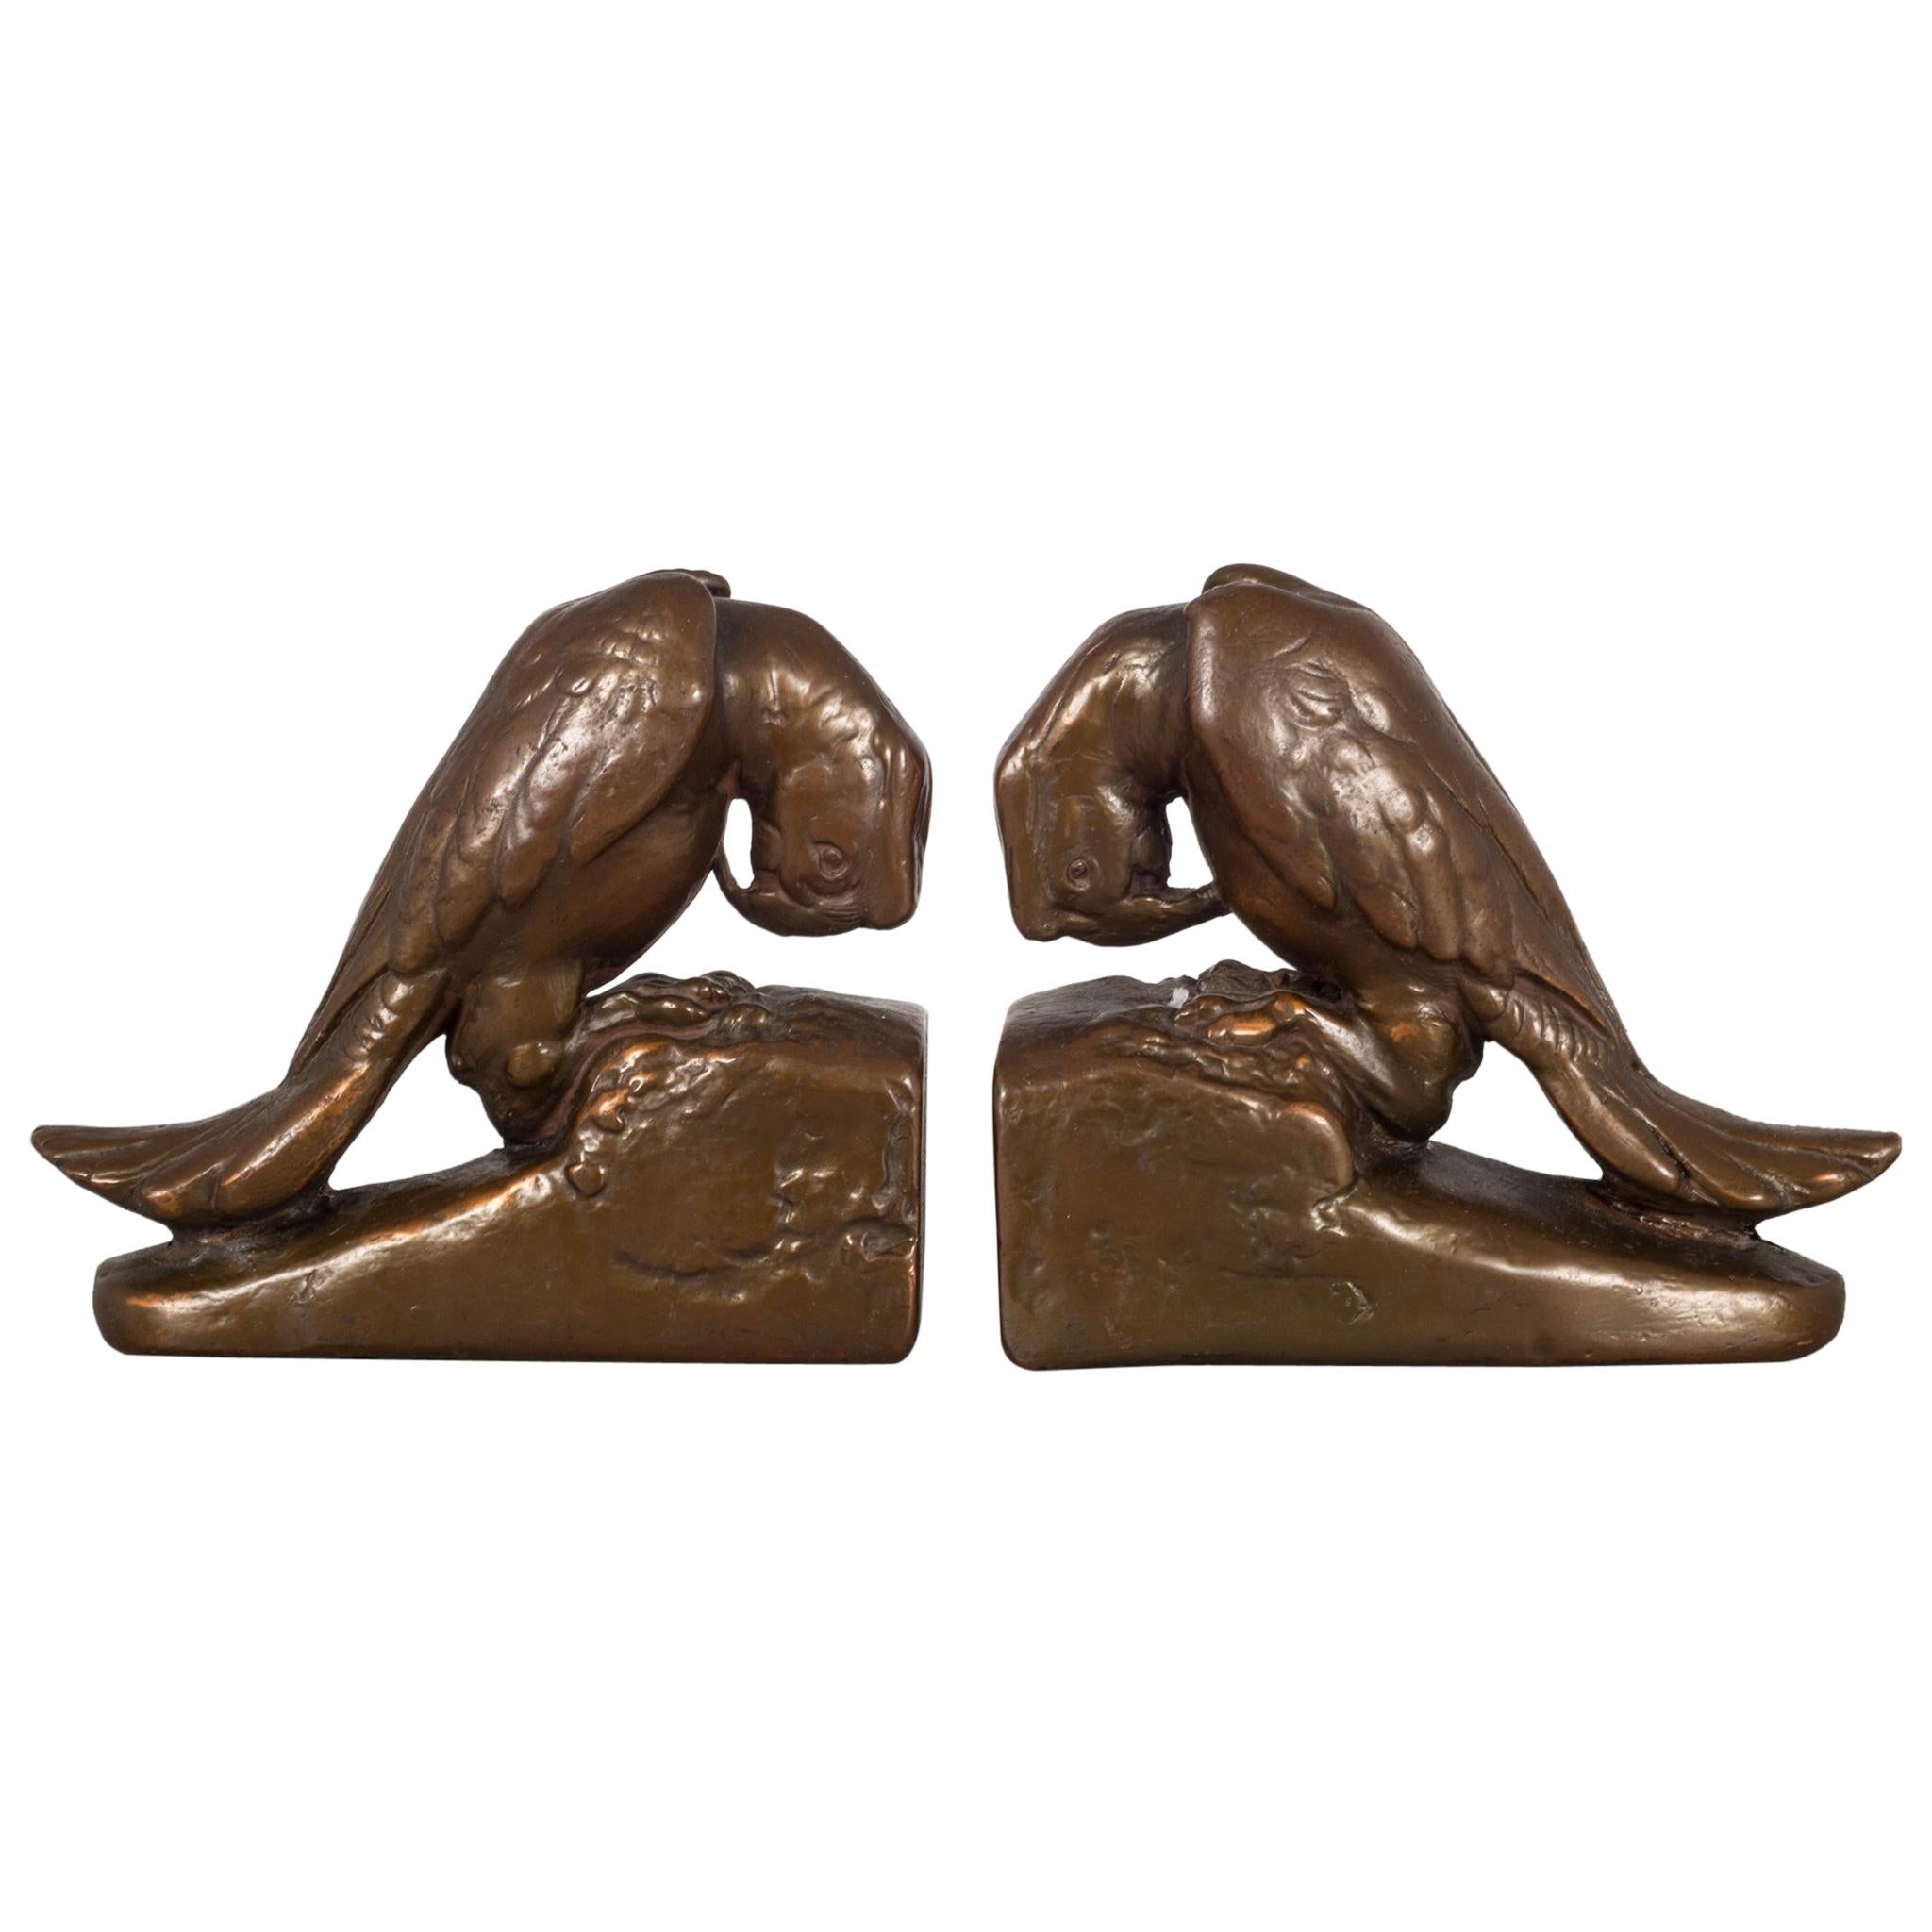 Copper-Plated Parrot Bookends by Armor Bronze, circa 1930